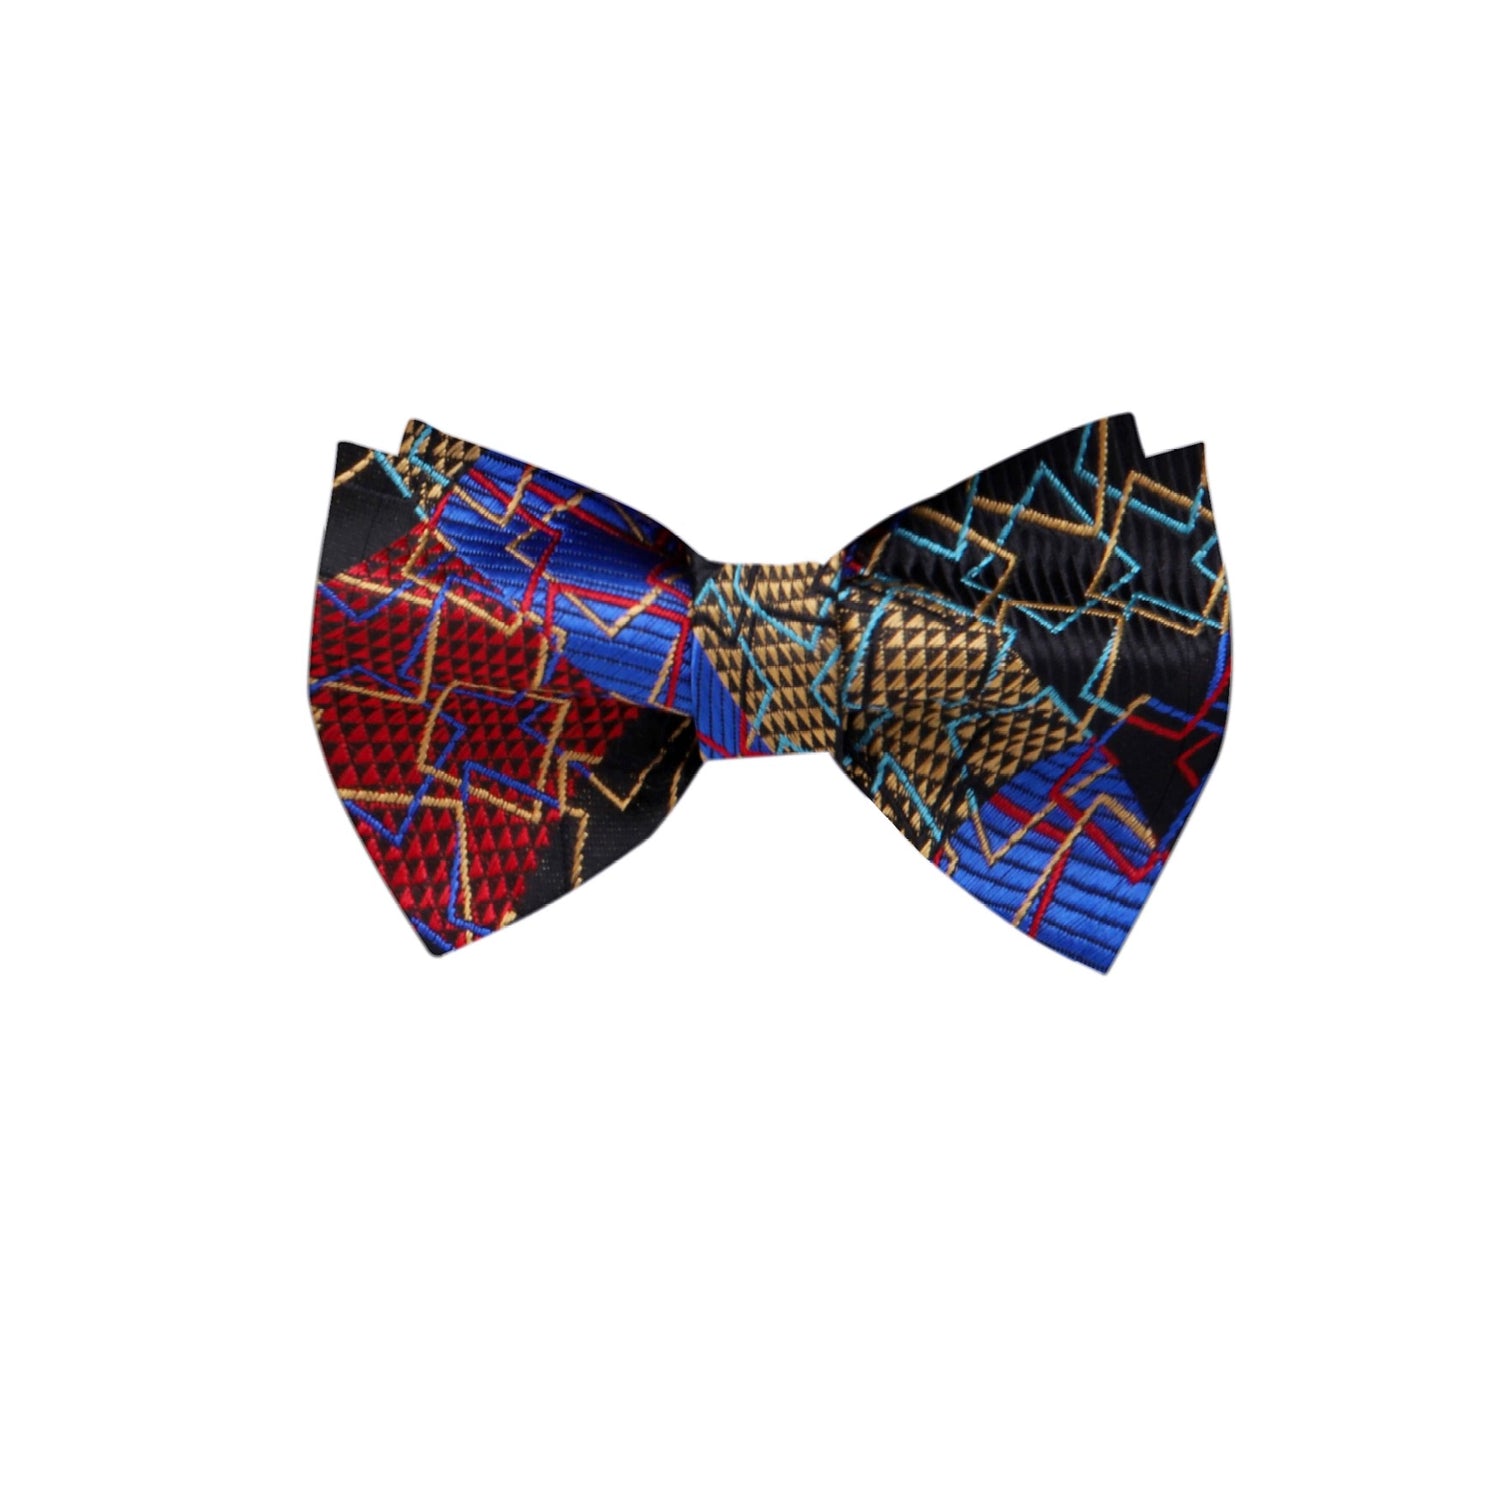 A Black, Gold and Red Geometric Bow Tie